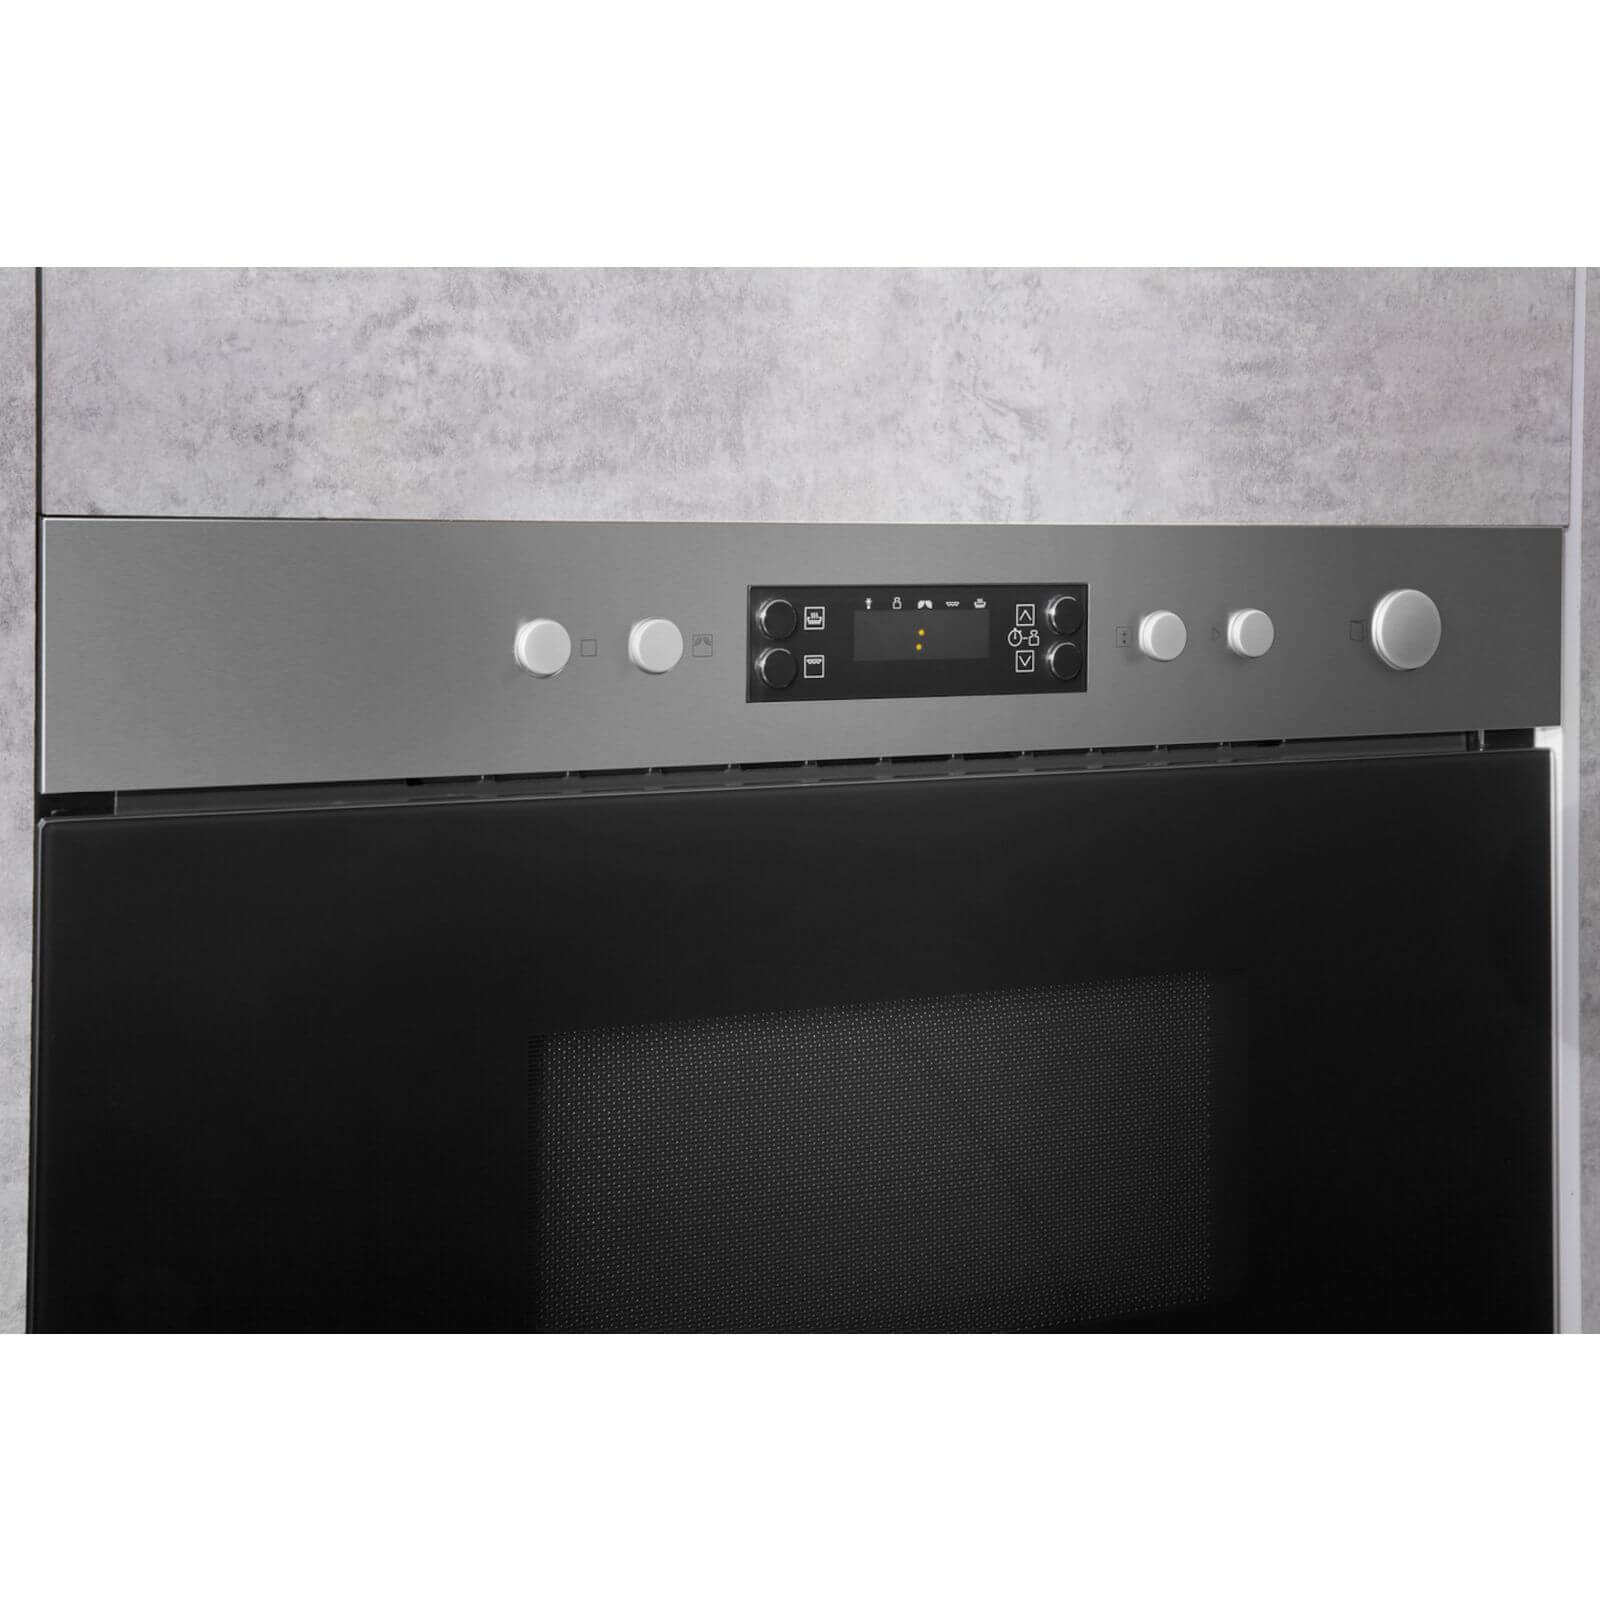 Hotpoint MN314 IX H Built-in Microwave Grill - Stainless Steel